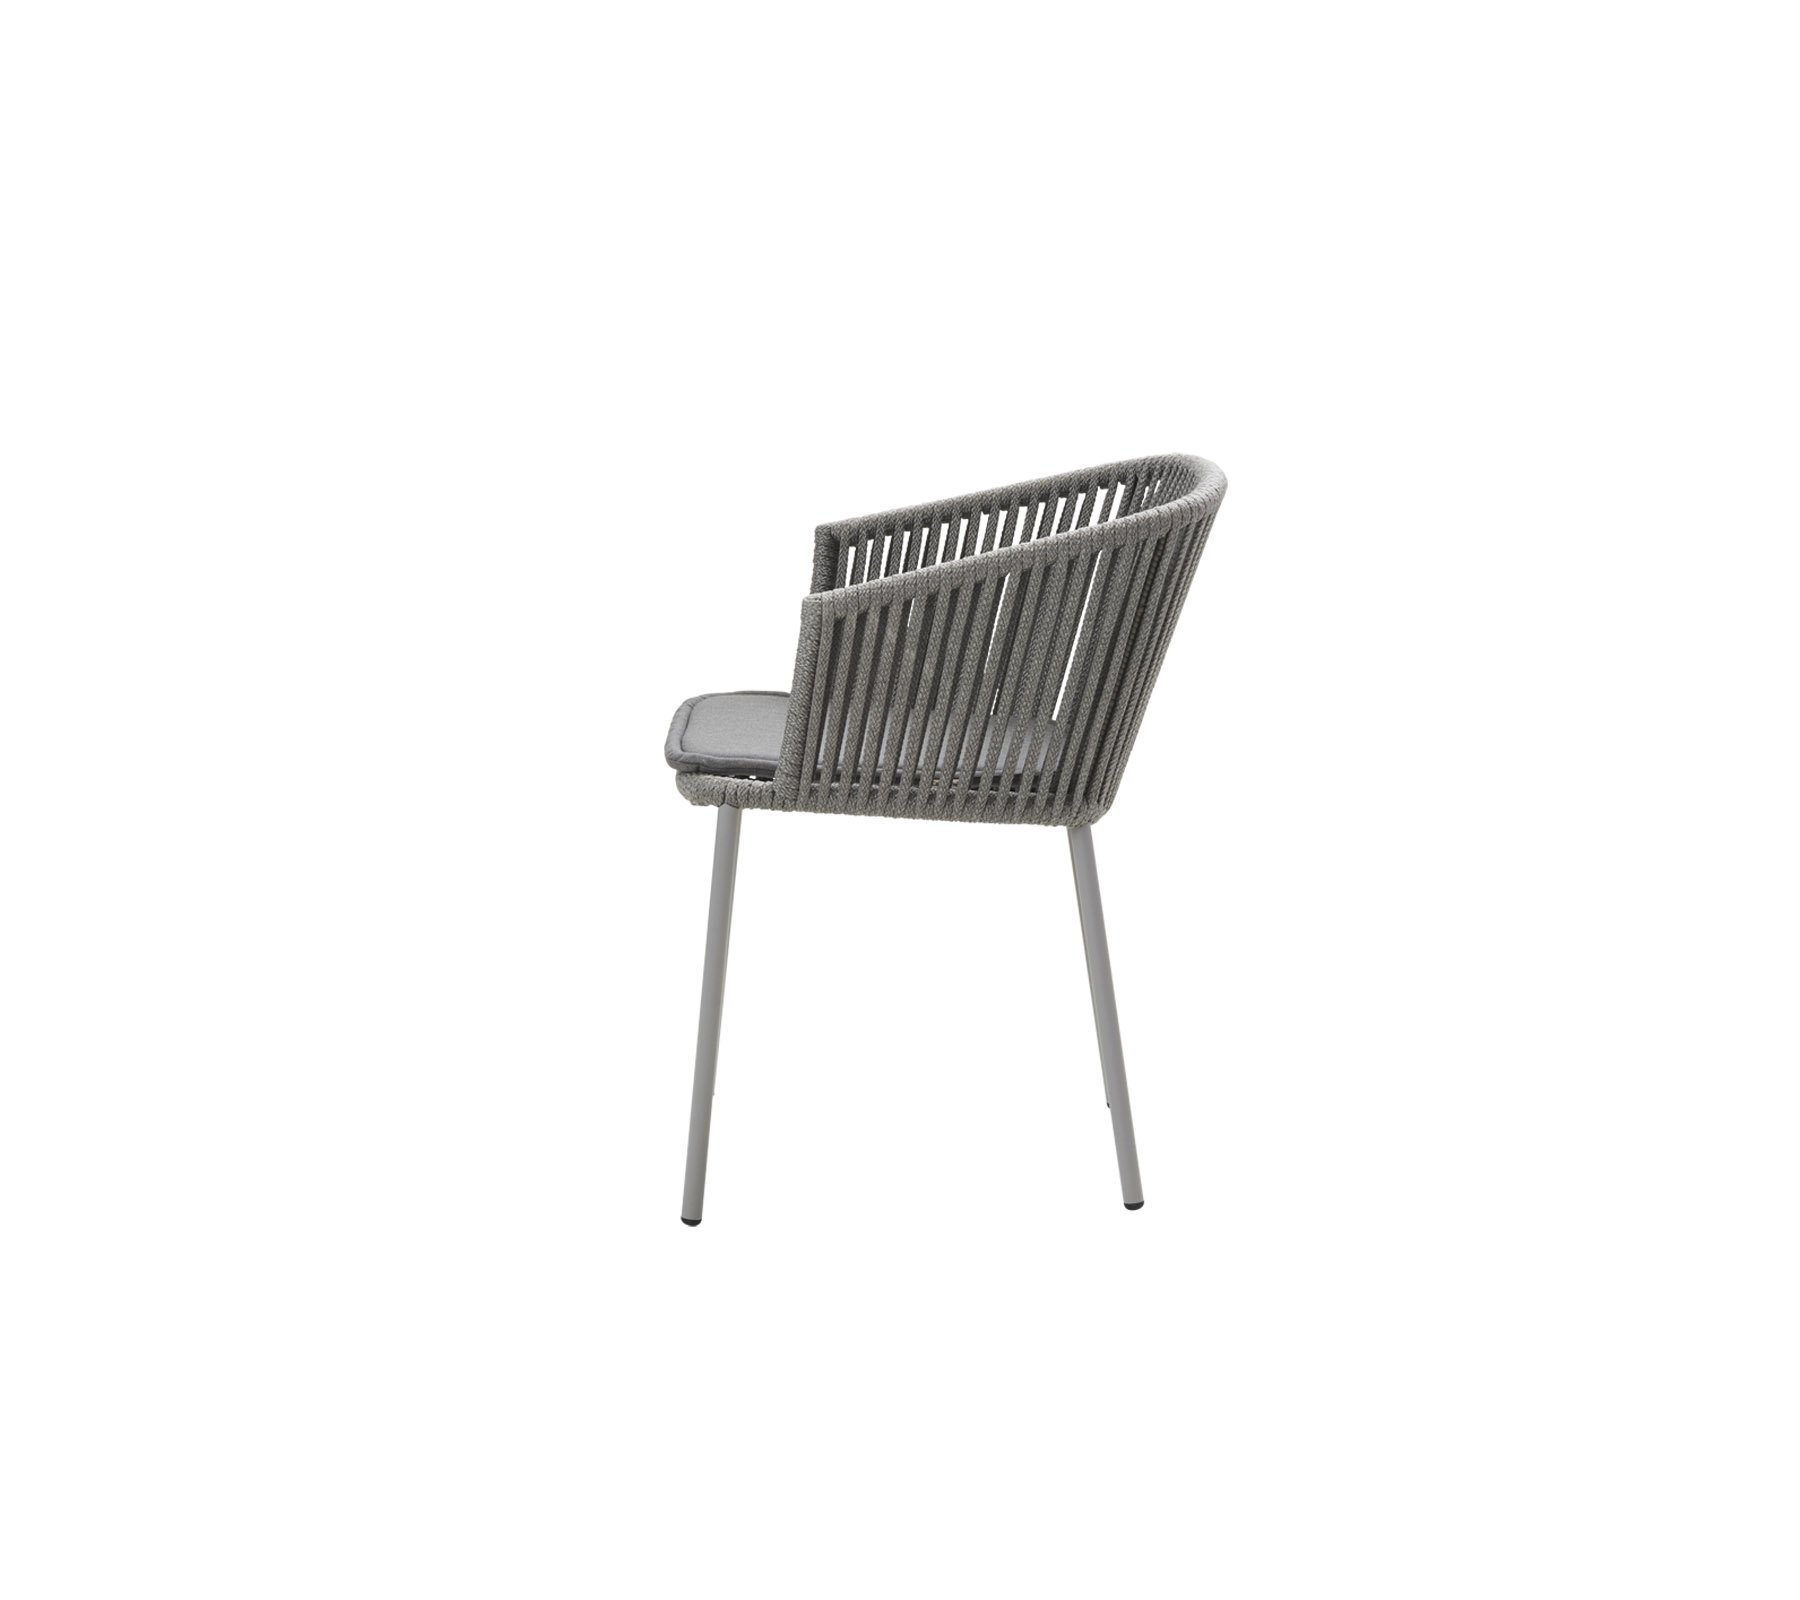 Moments Chair Stackable from Cane-line, designed by Foersom & Hiort-Lorenzen MDD